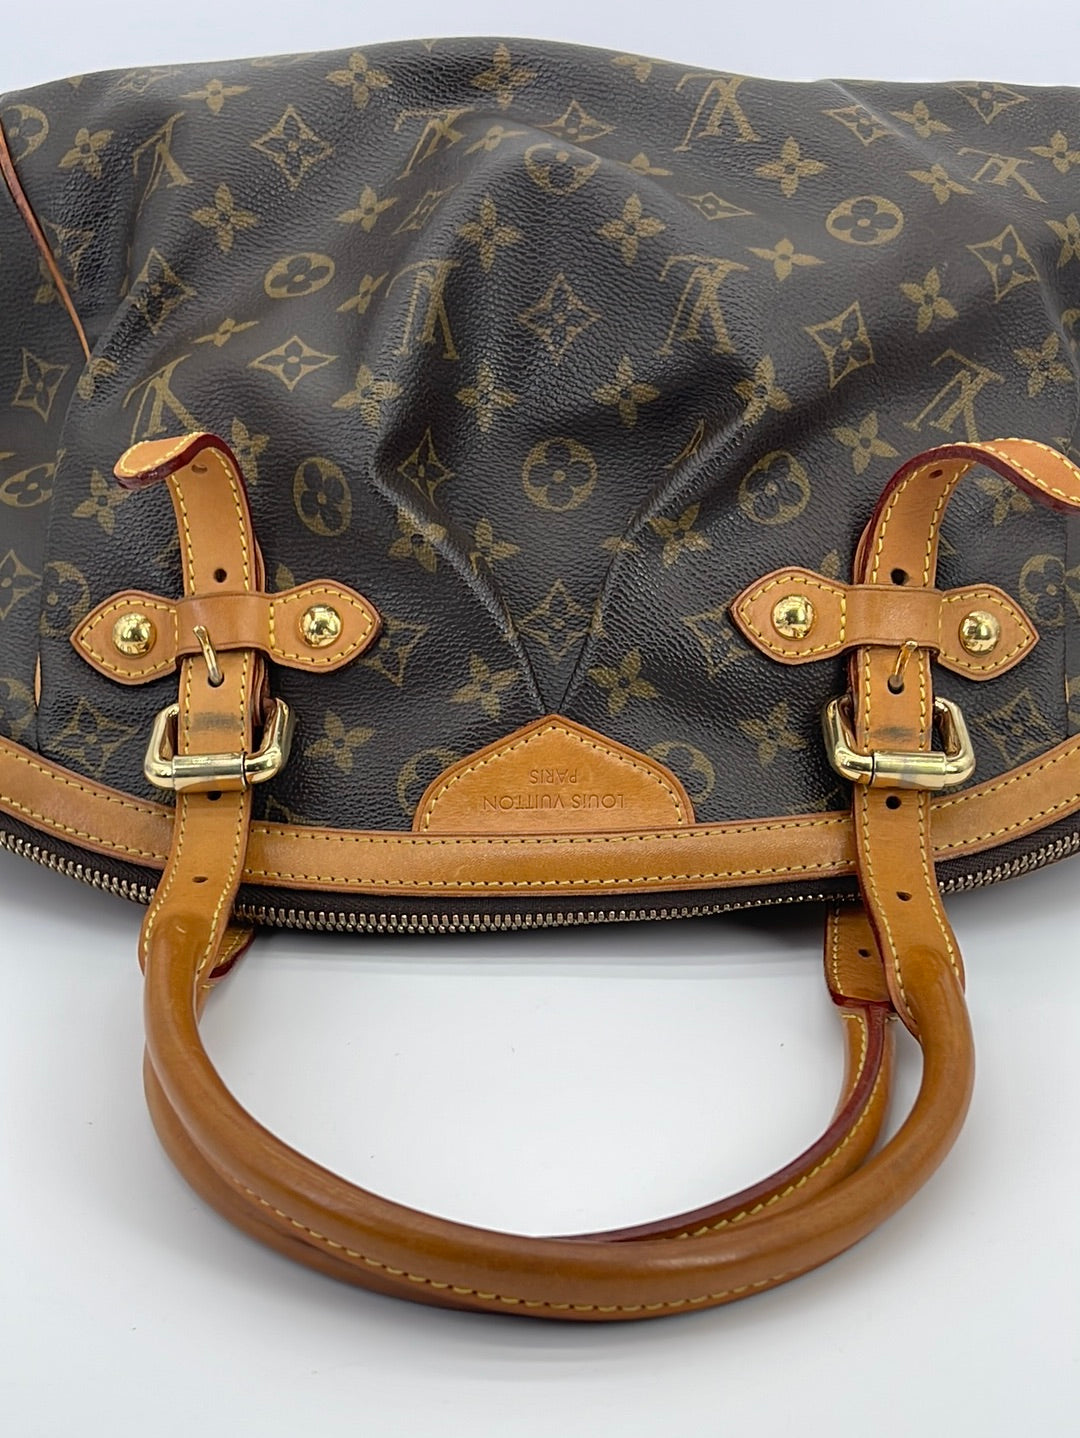 LoveLuxuryPH - Louis Vuitton Tivoli PM Monogram VI5008, Made in France 9/10  excellent preloved condition With tags dust bag and paper bag Php 39,000  Arriving 1st week of July. Accepting reservations now. ❤️